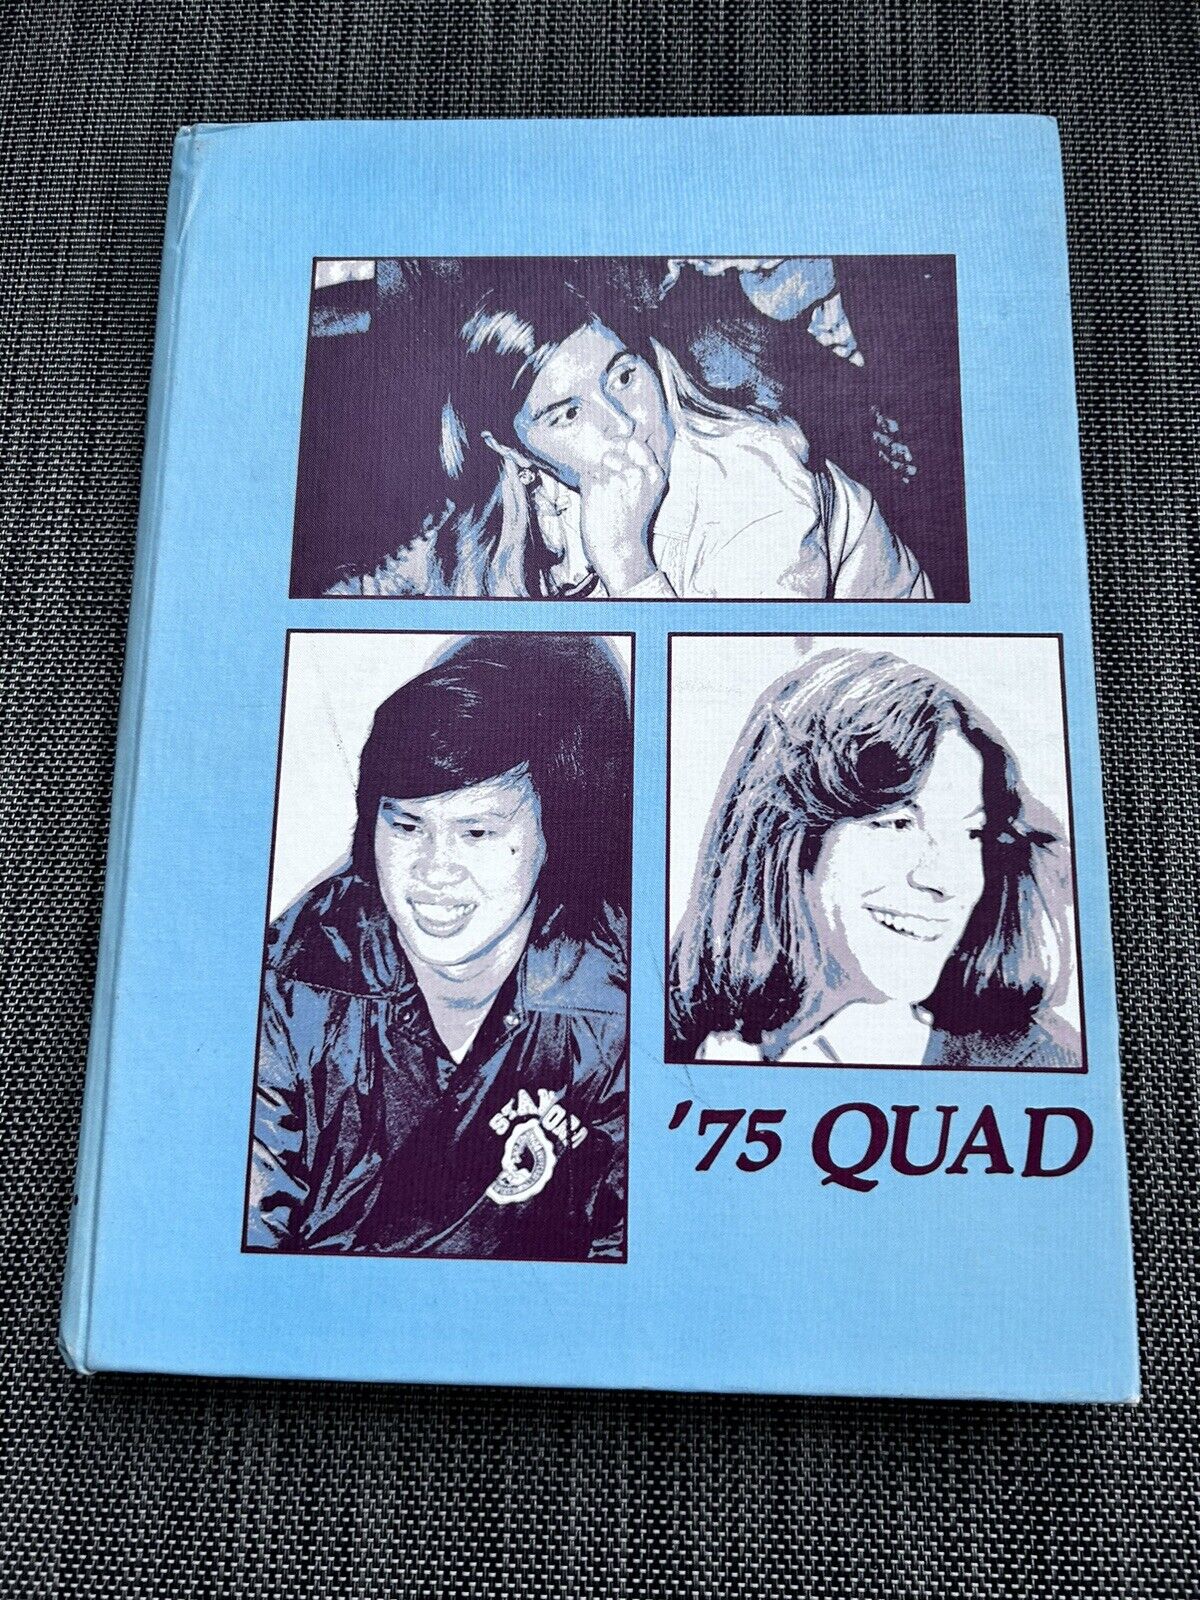 Stanford University The Quad Yearbook 1975 Hardcover No Signatures